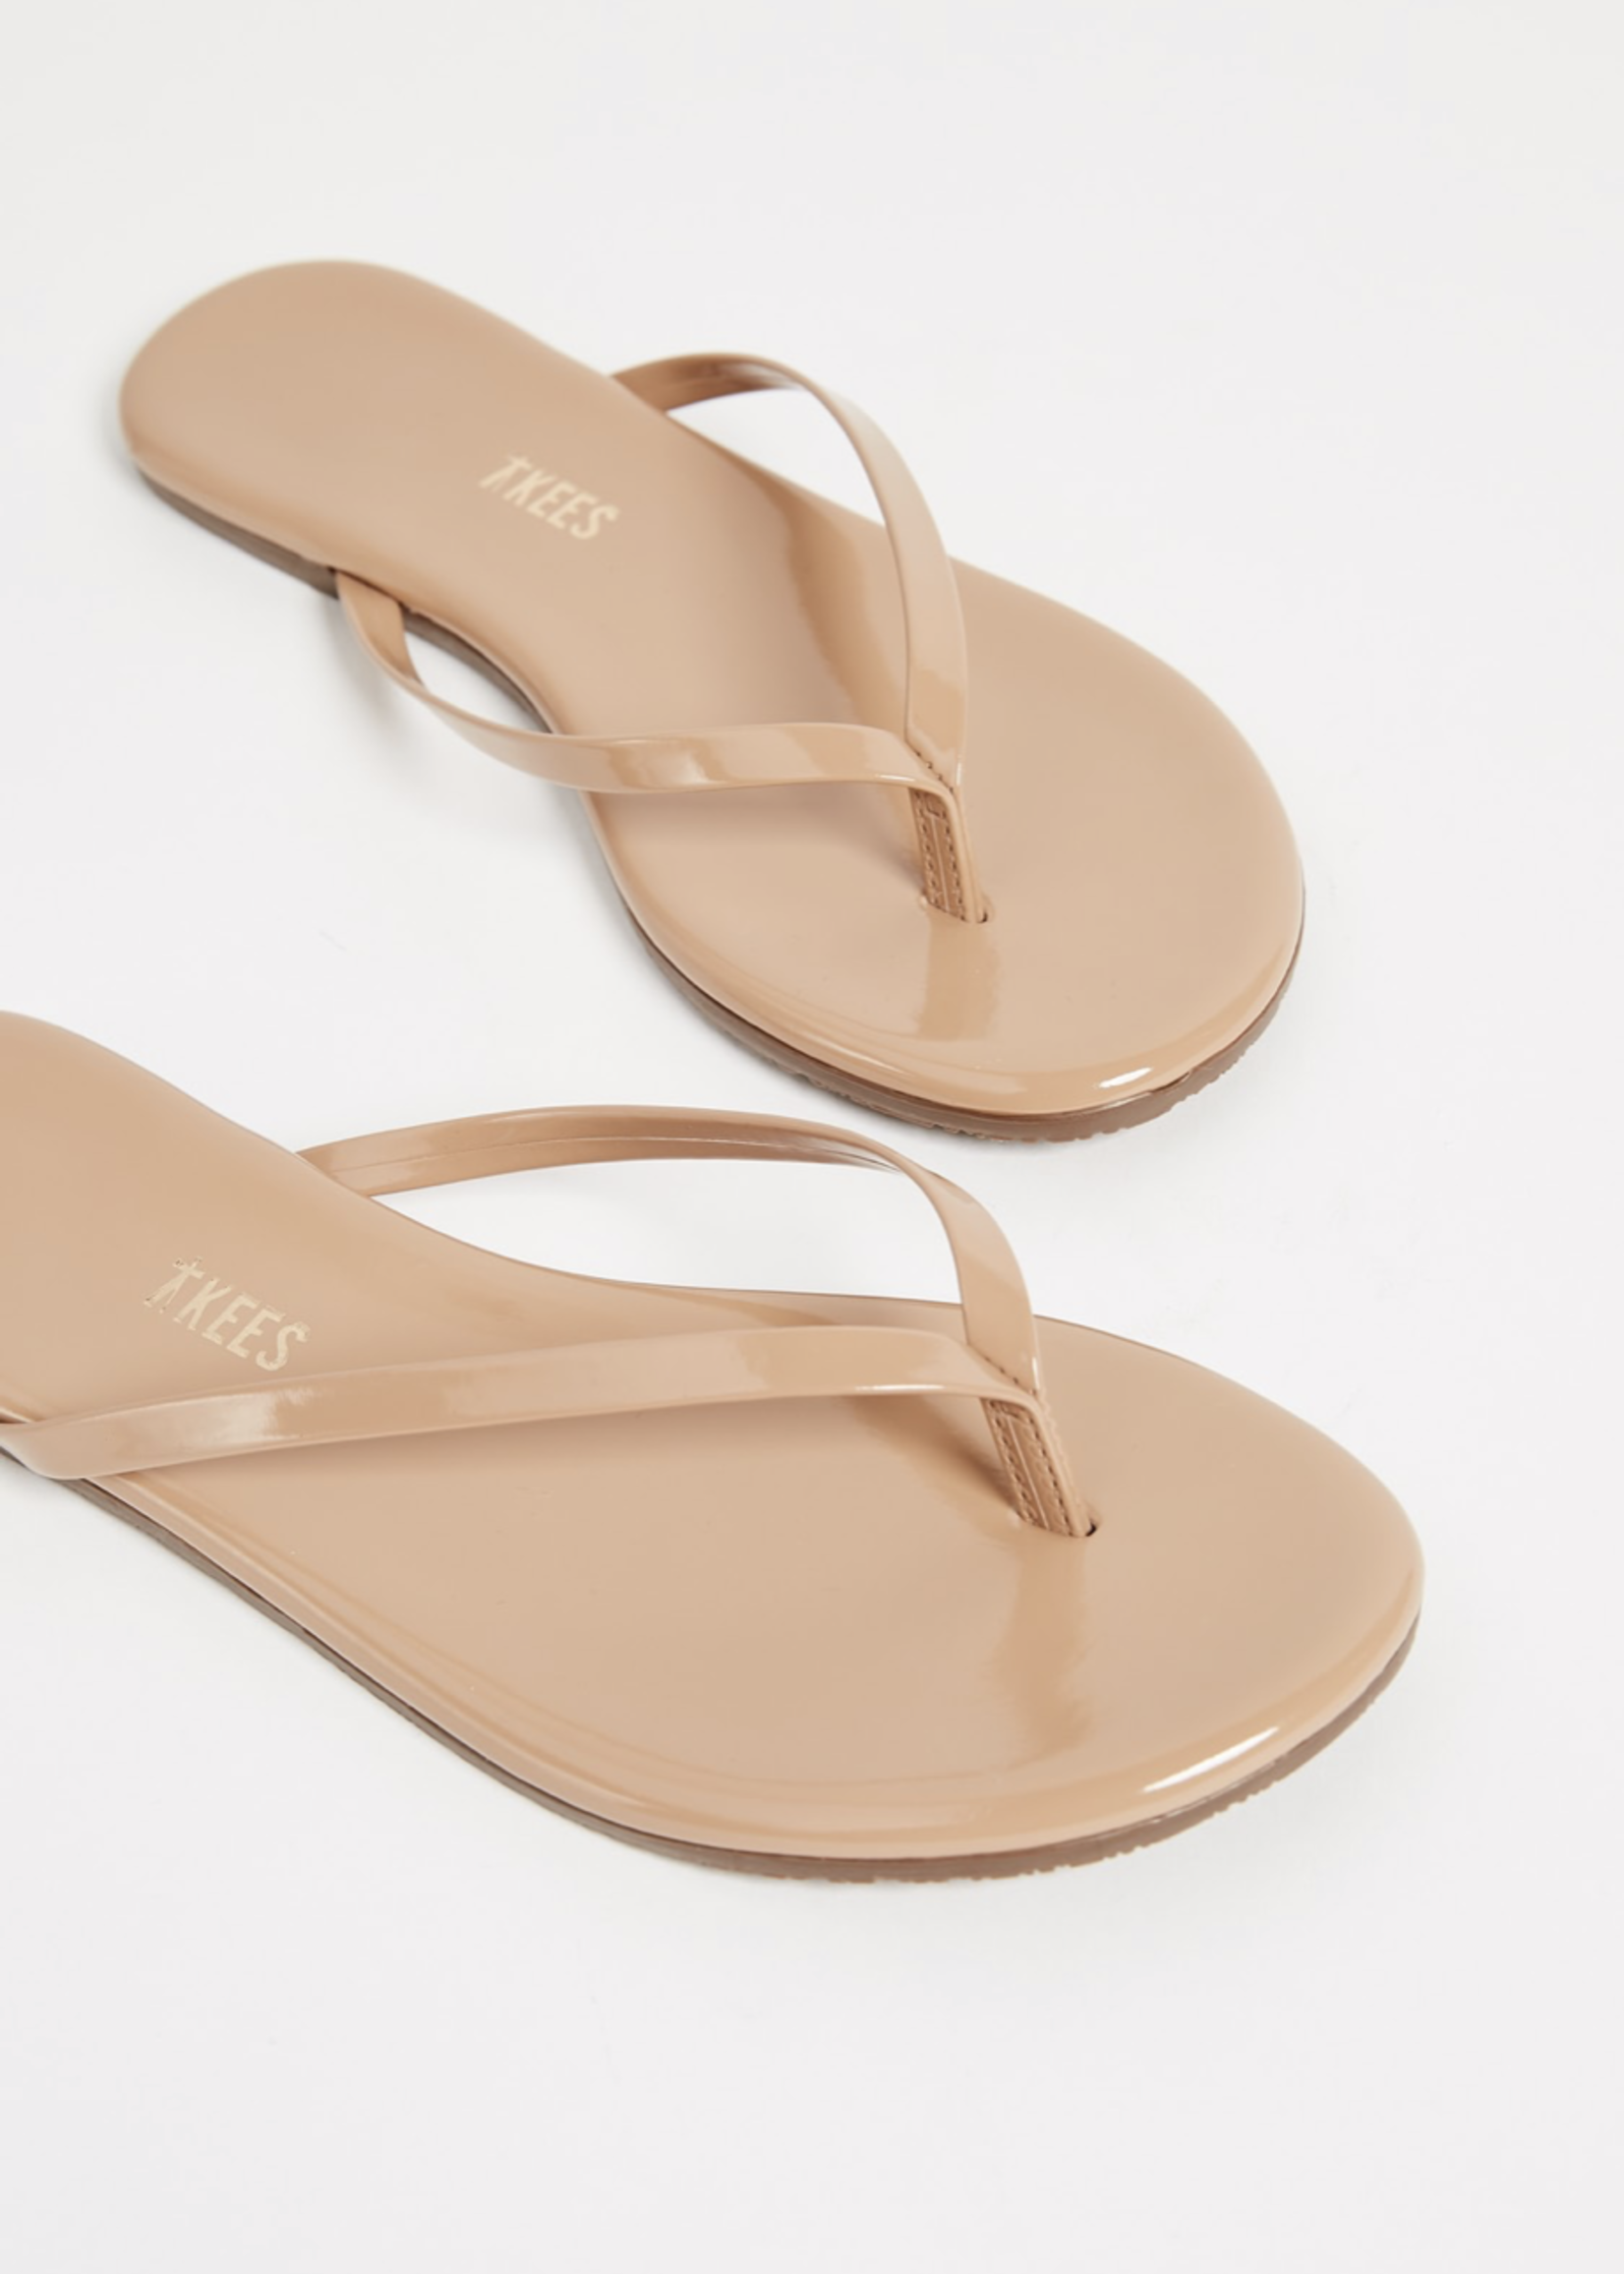 TKEES FOUNDATIONS GLOSS FLIP FLOP